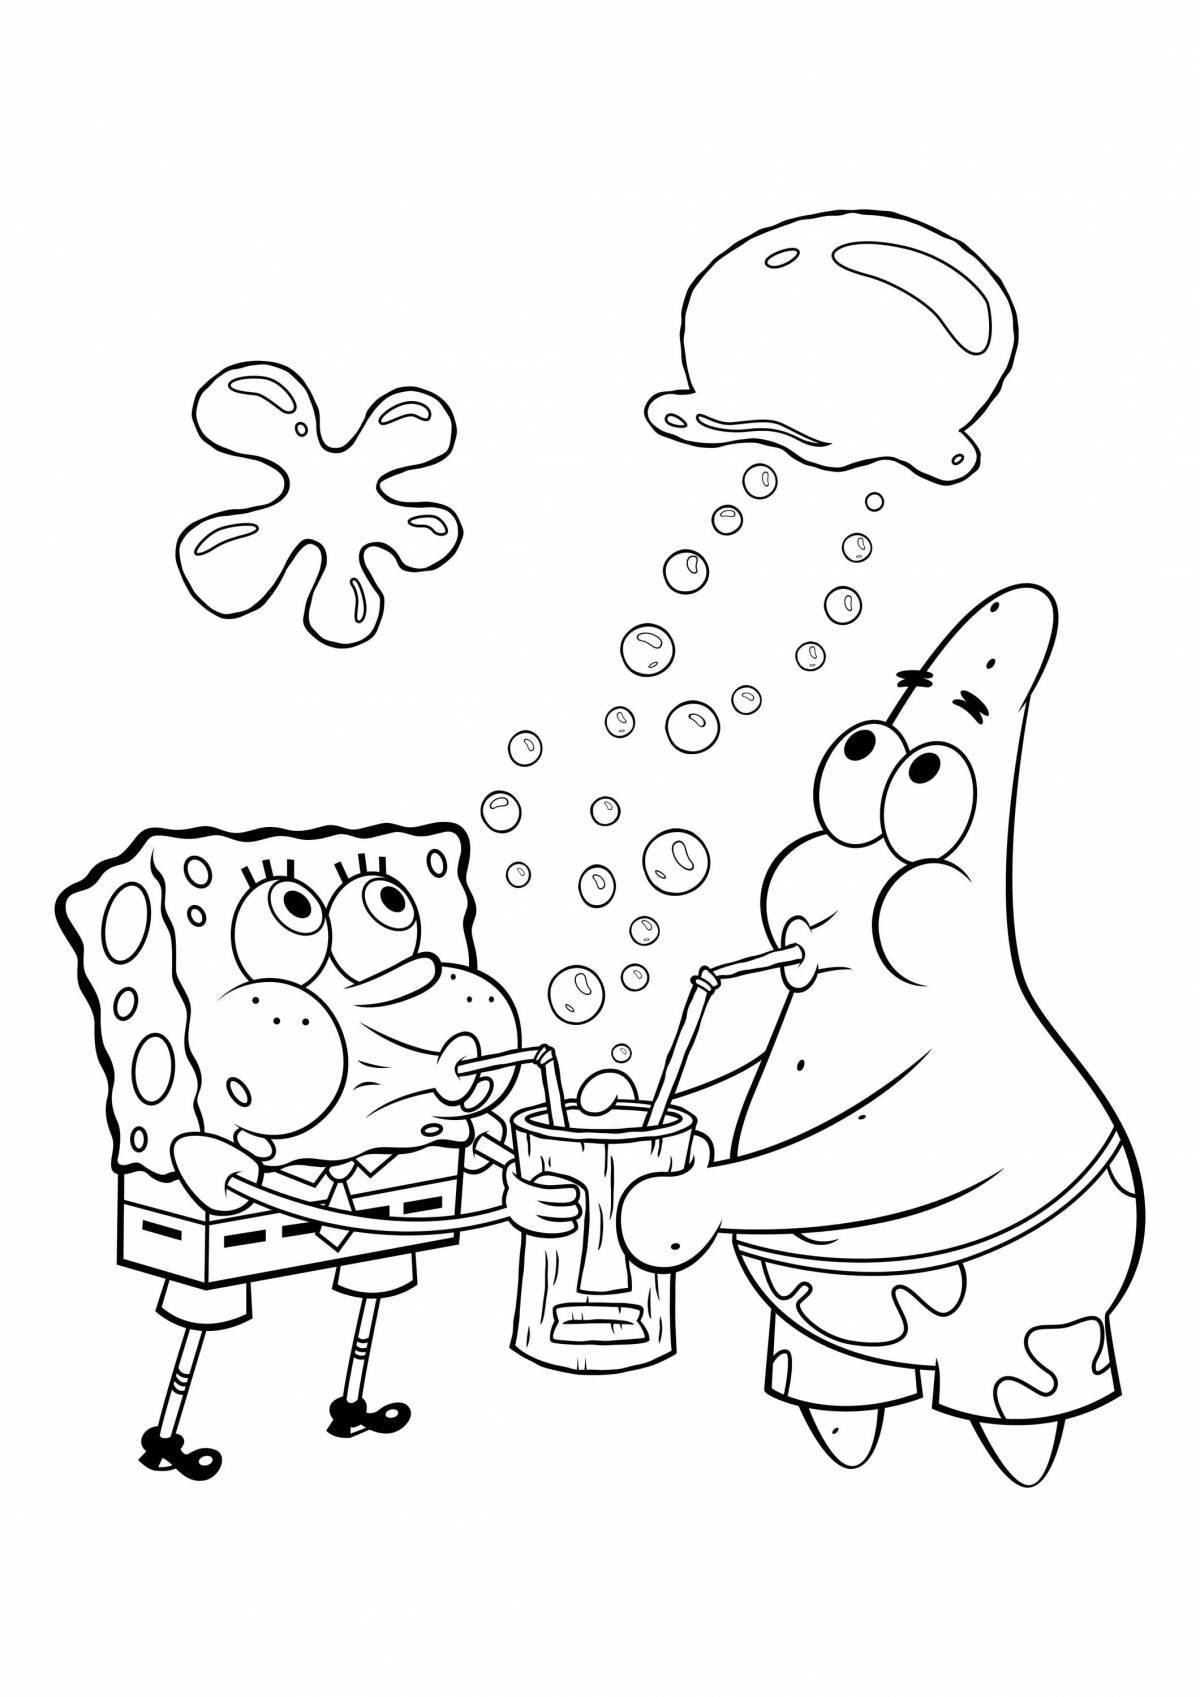 Spongebob awesome coloring book all heroes